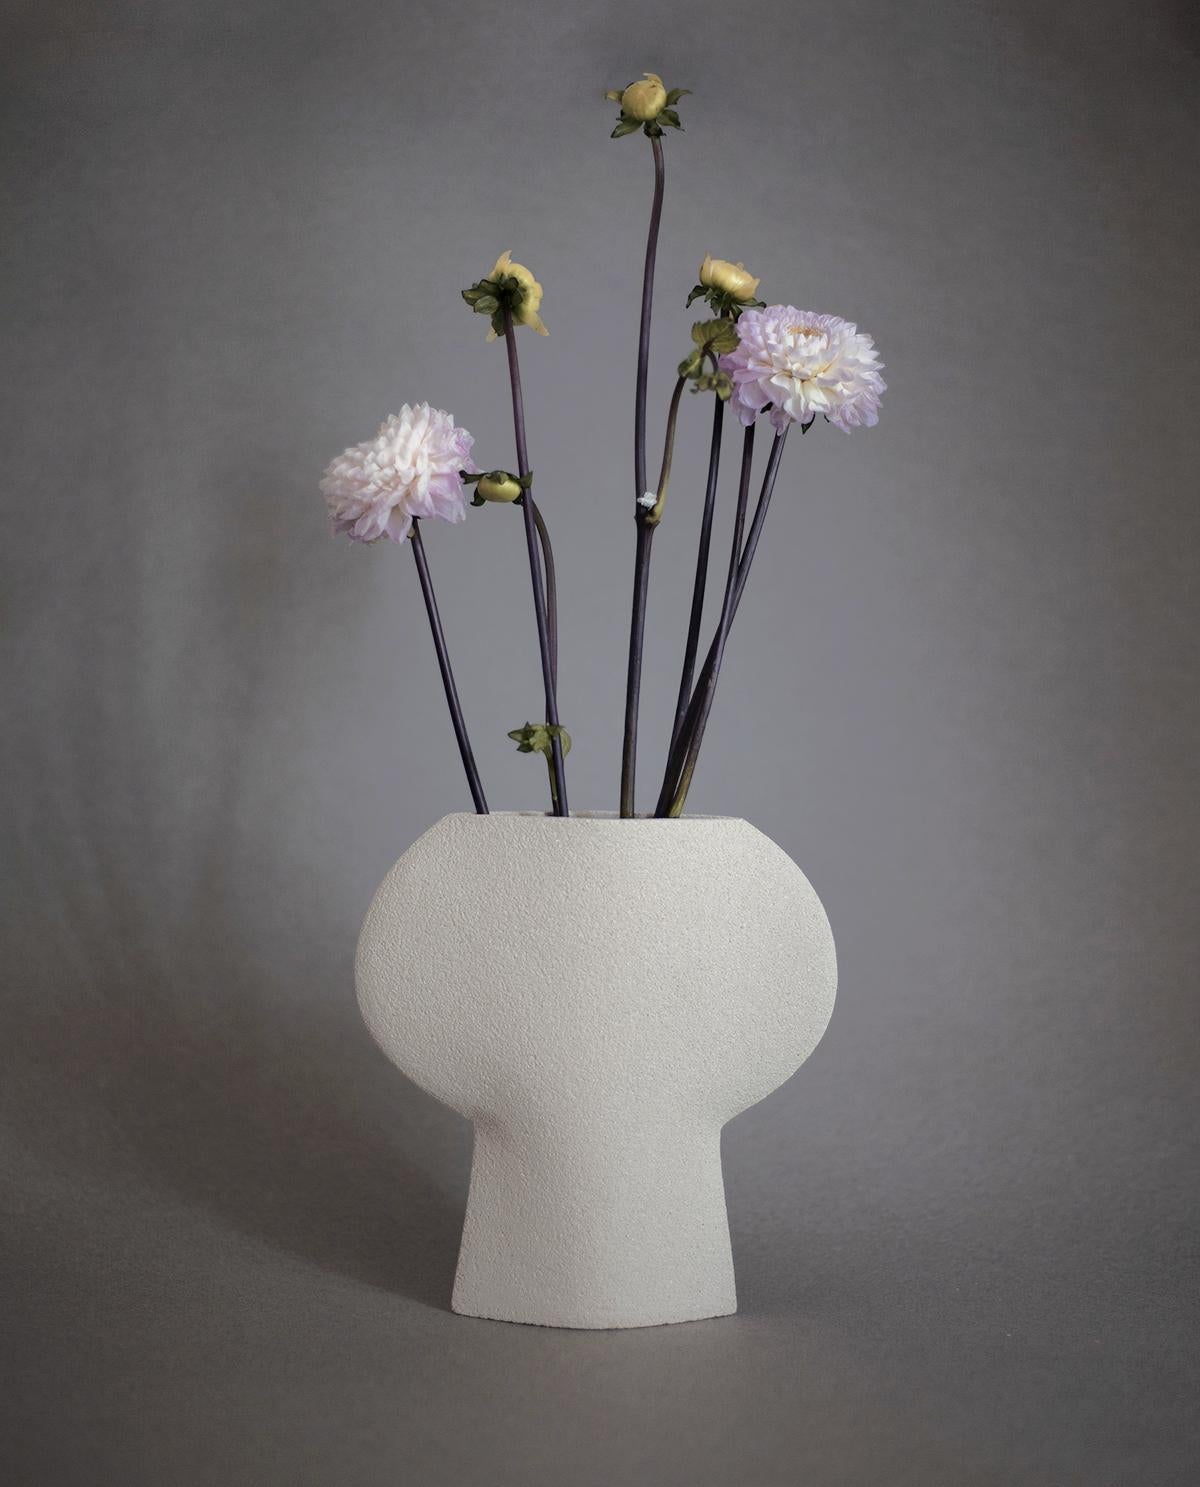 European 21st Century Clover Vase in White Ceramic, Hand-Crafted in France For Sale